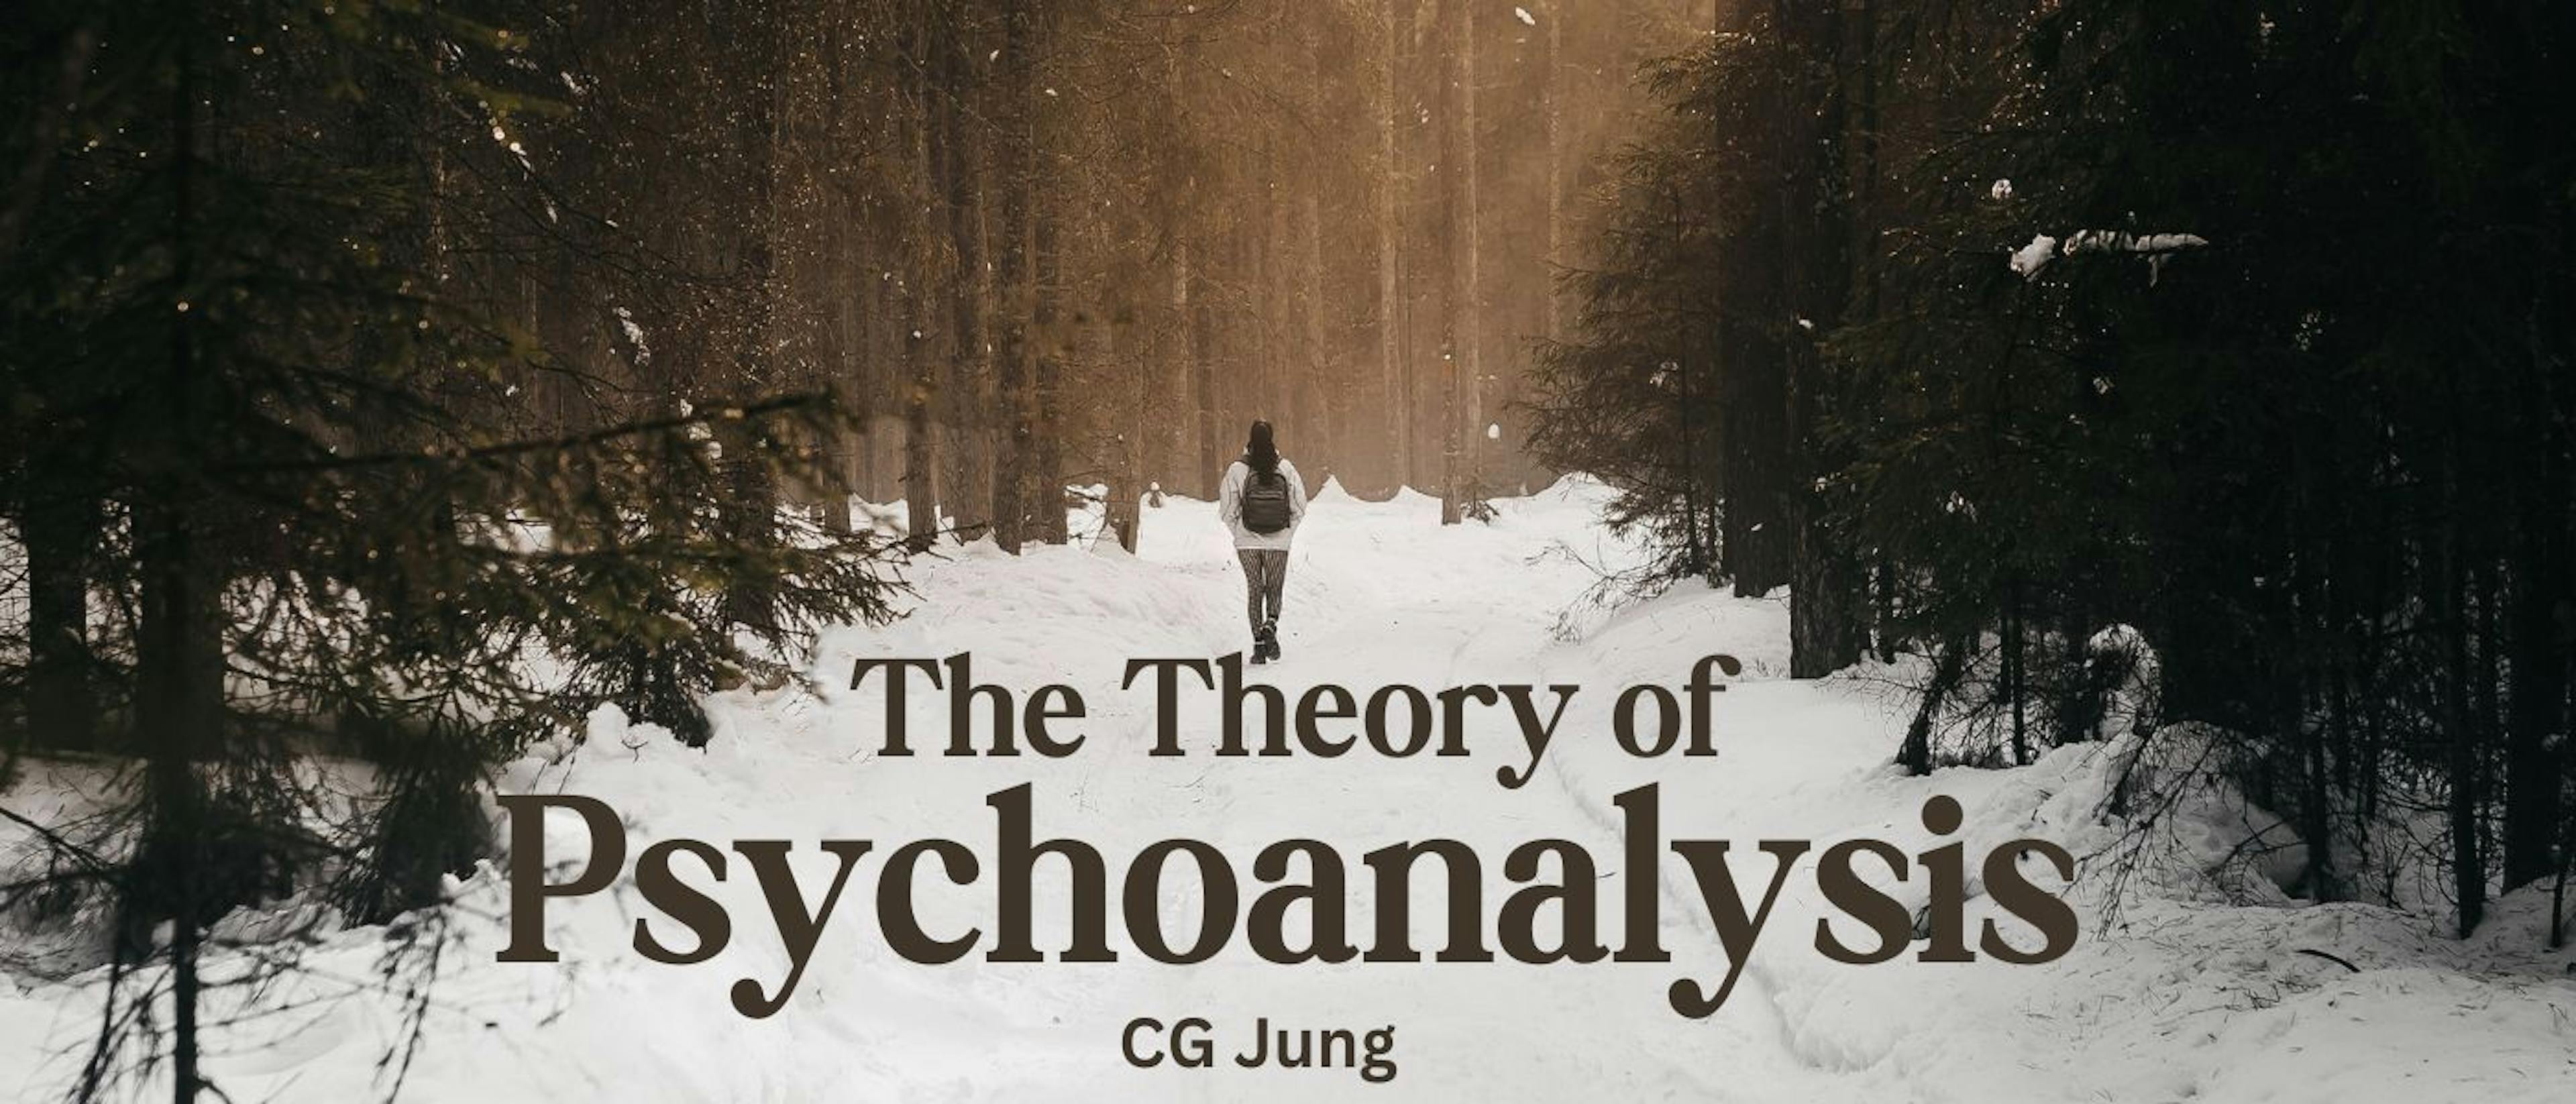 featured image - The Theory of Psychoanalysis by C. G. Jung - Table of Links